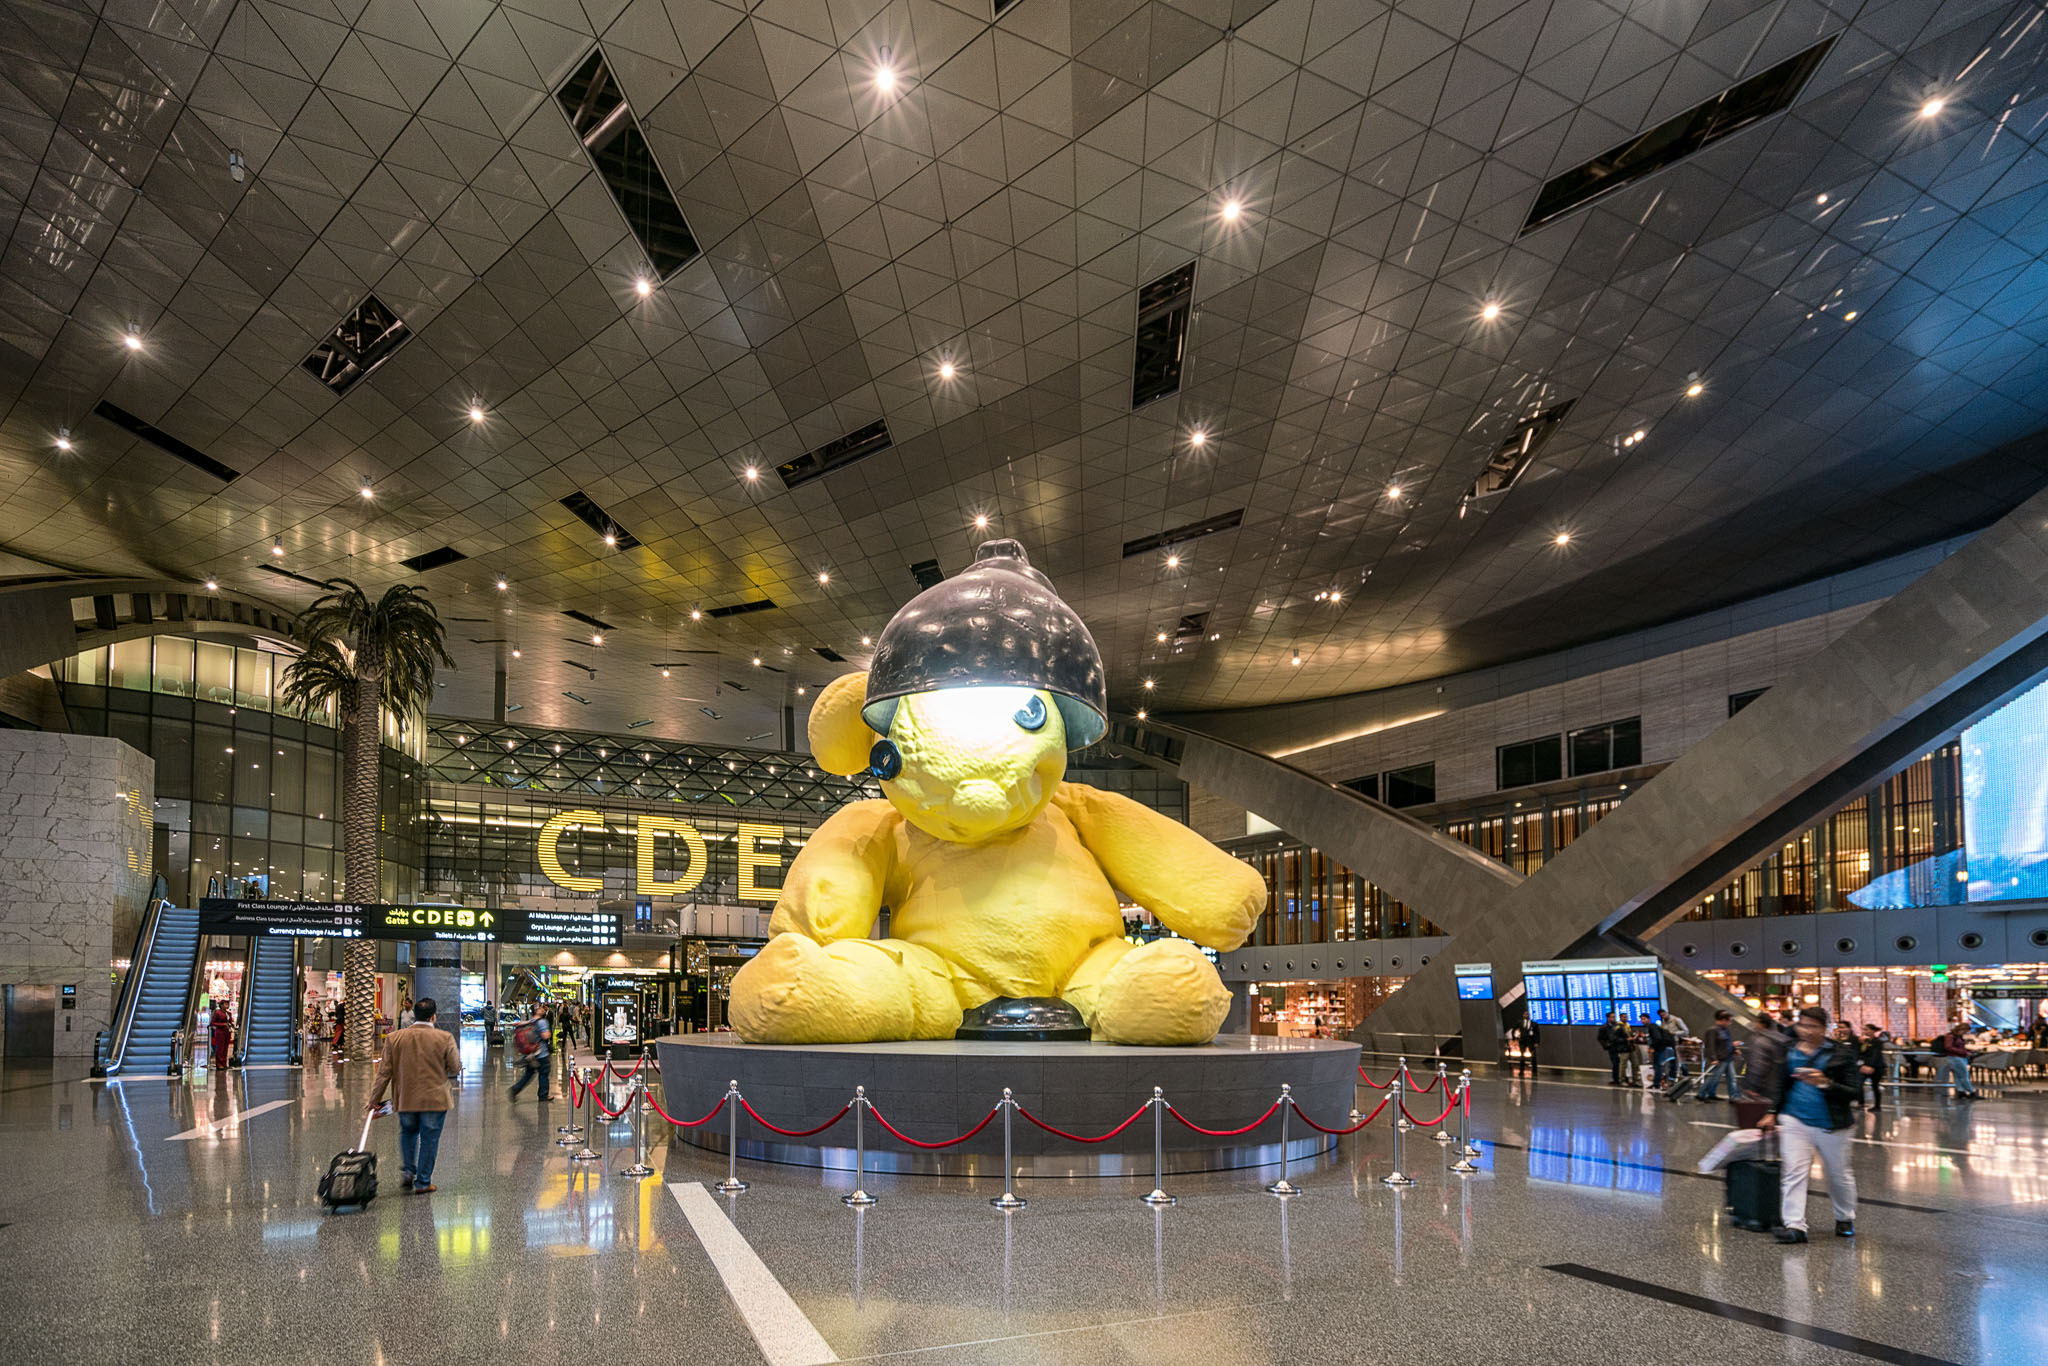 a large stuffed bear statue in a large building